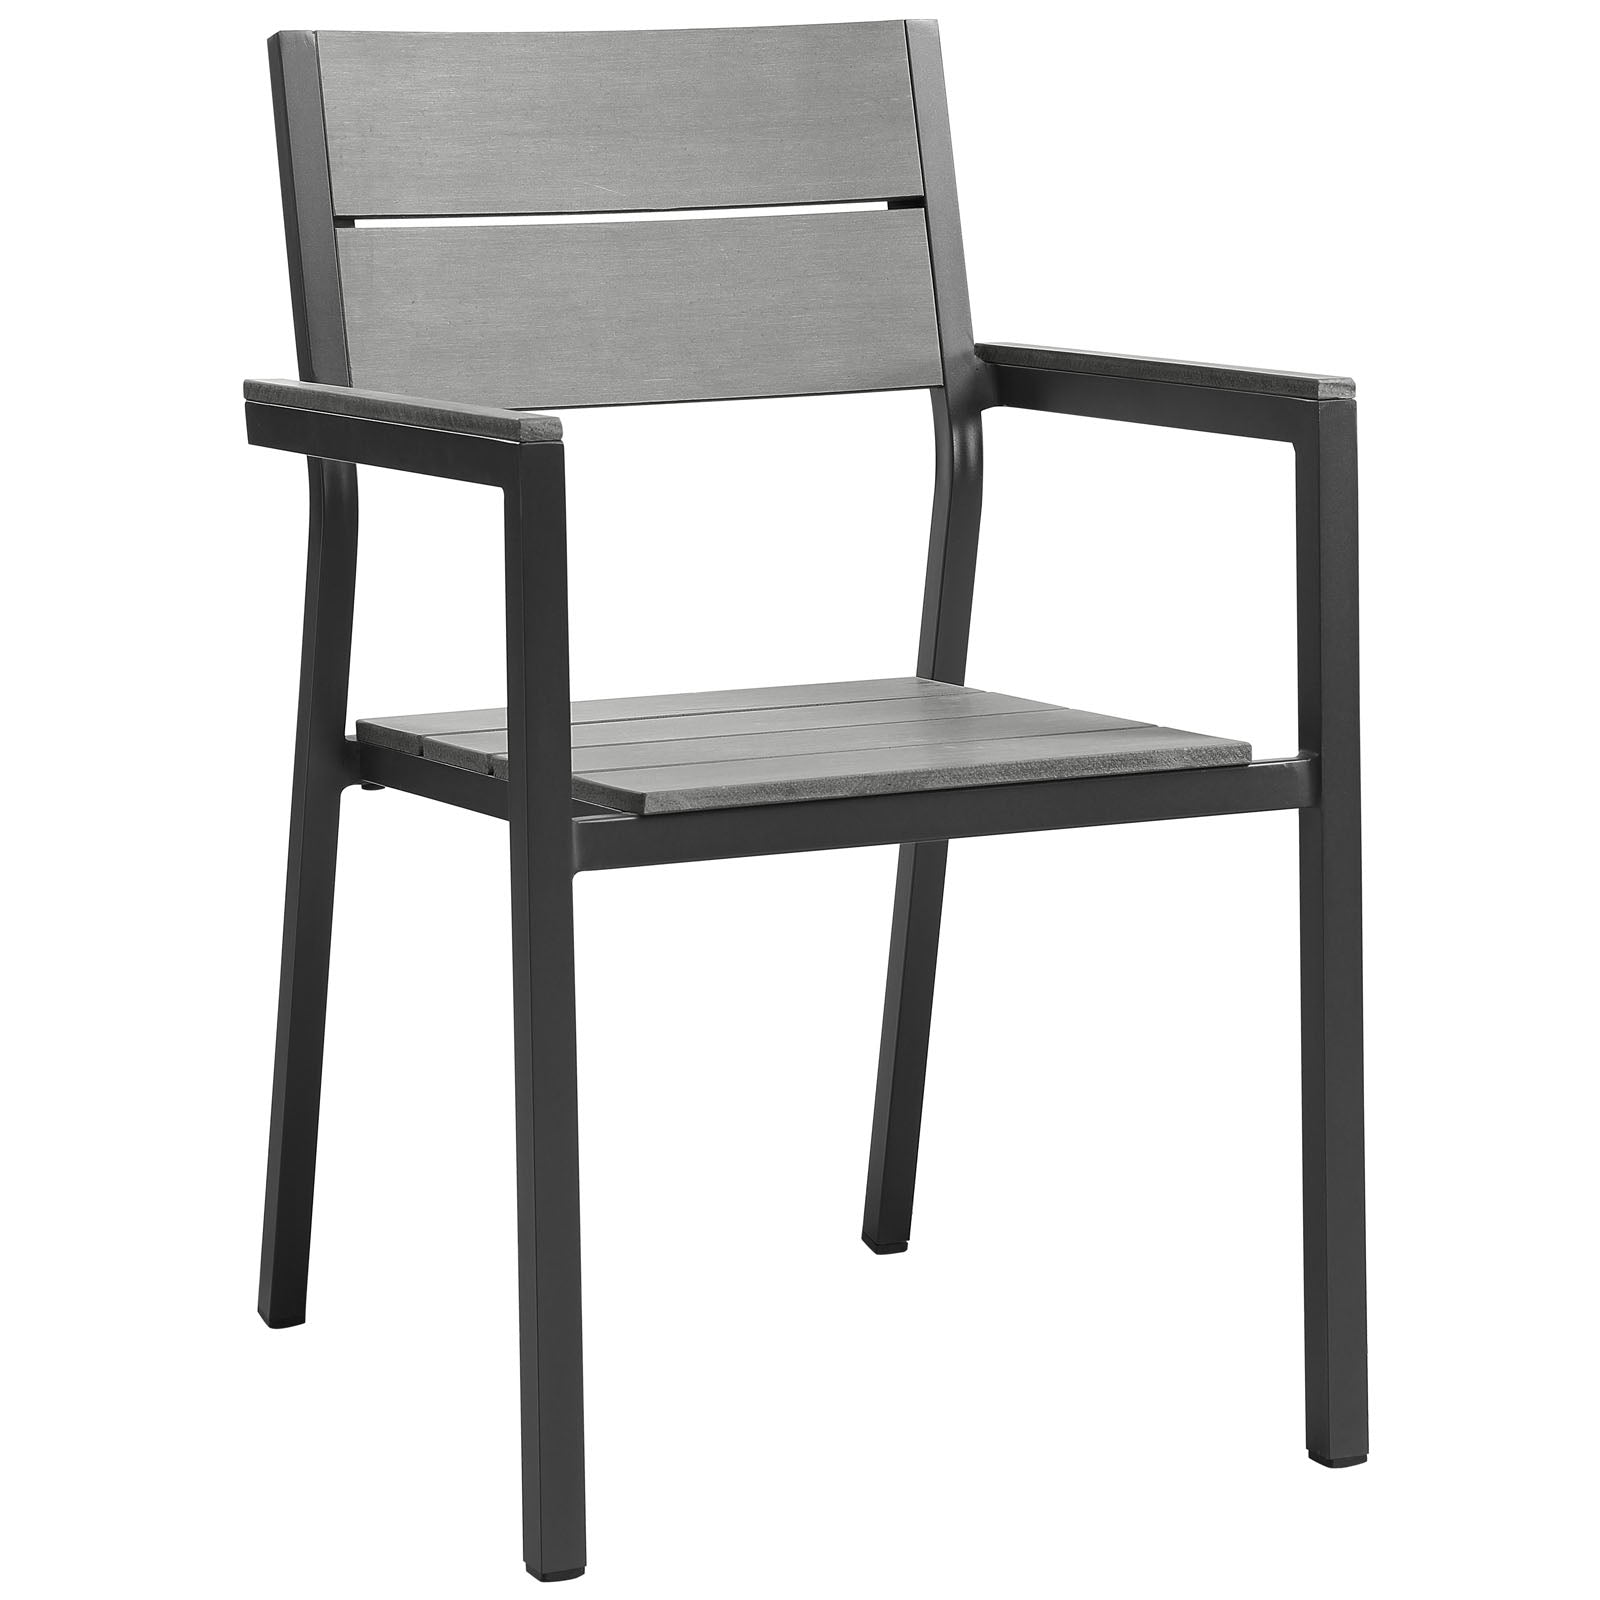 Modway Outdoor Dining Chairs - Maine Dining Armchair Outdoor Patio Brown & Gray (Set of 2)